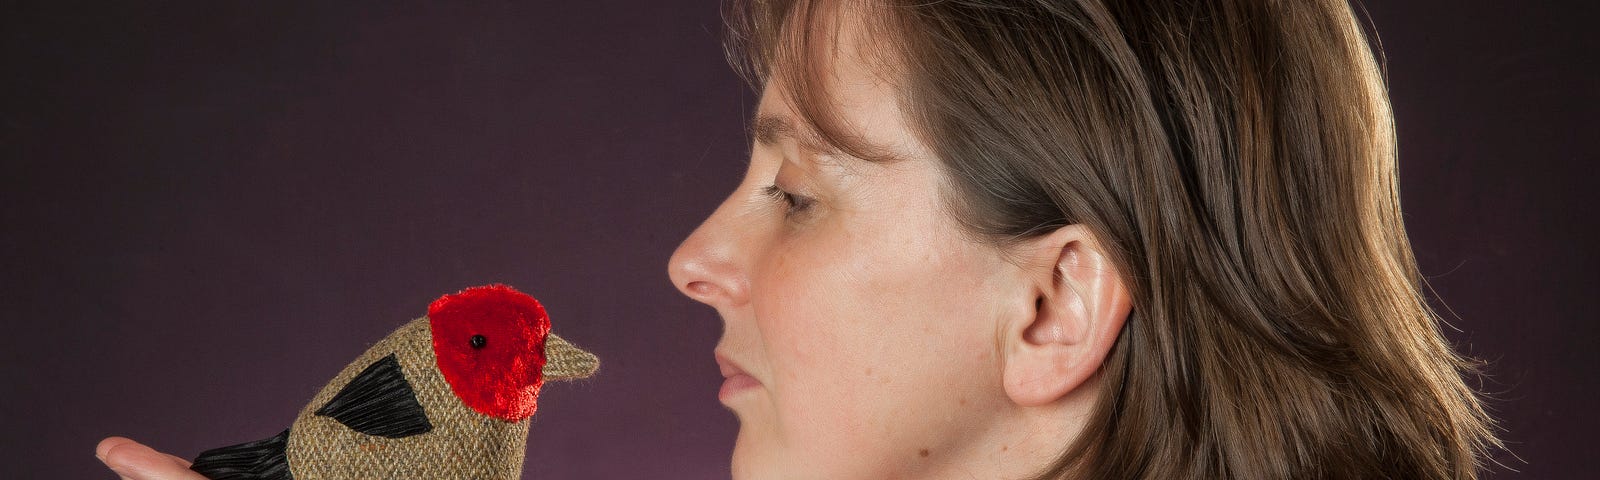 writer and storyteller Ailie Finlay looking at a fabric bird she holds in the palm of her hand, against a purple background